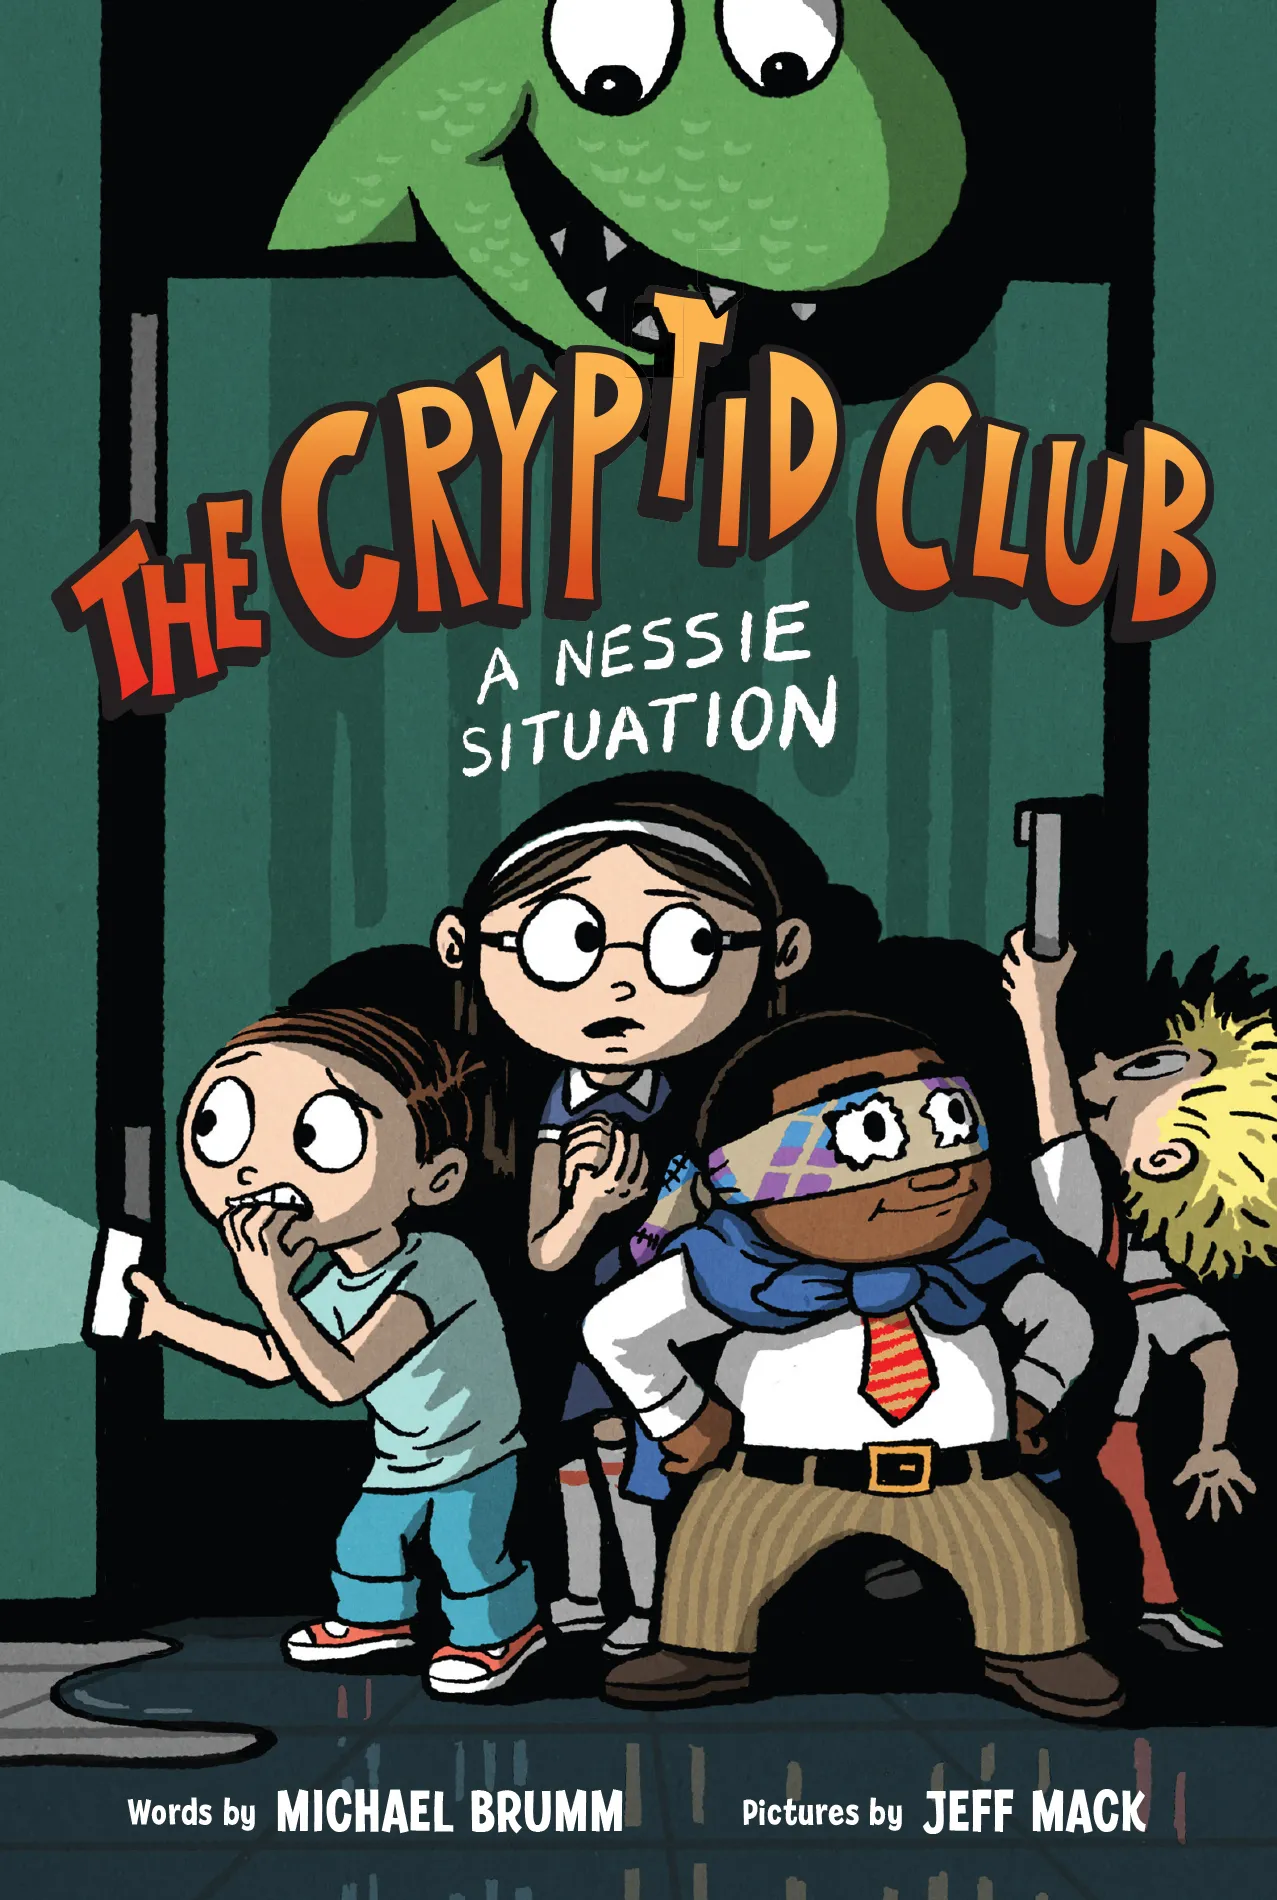 A Nessie Situation (The Cryptid Club #2)